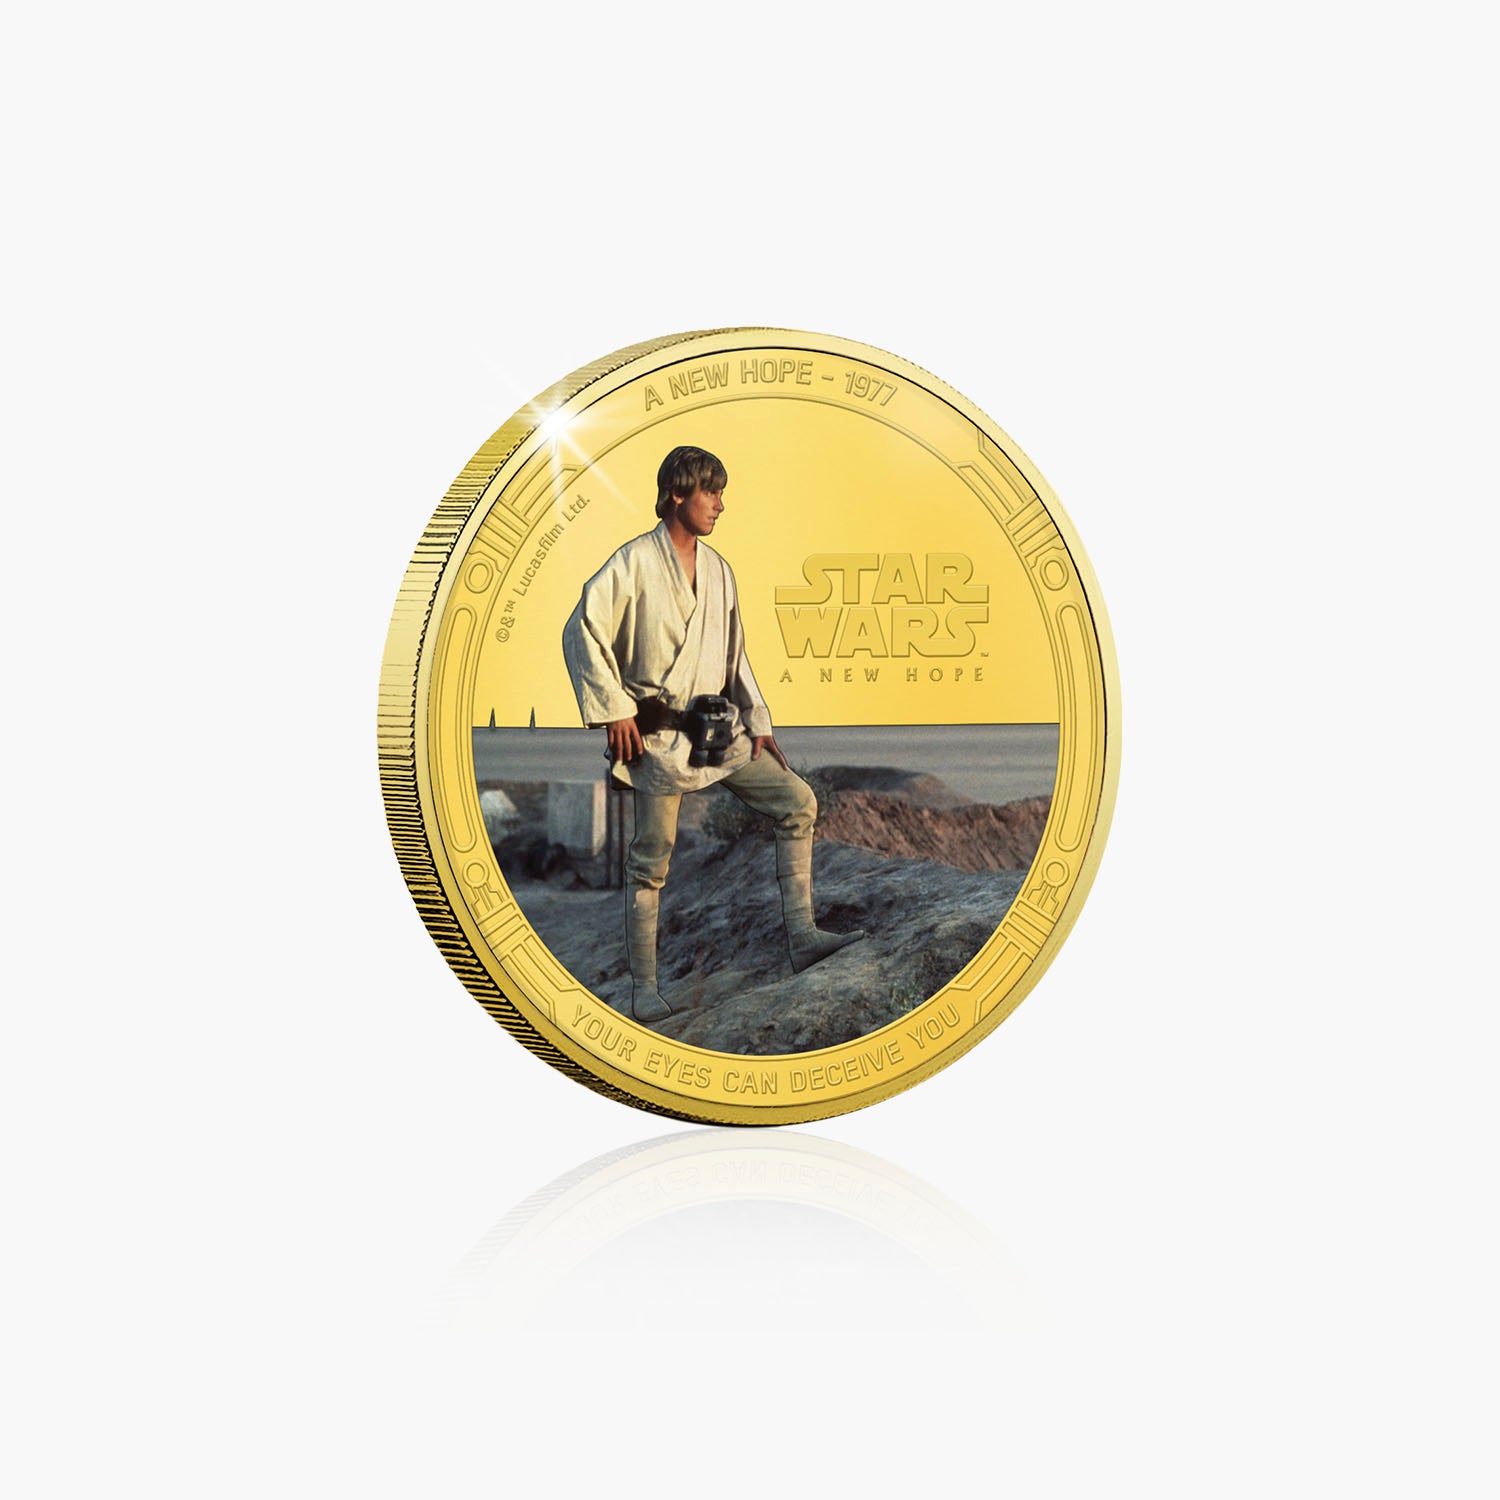 A New Hope Gold Plated Commemorative